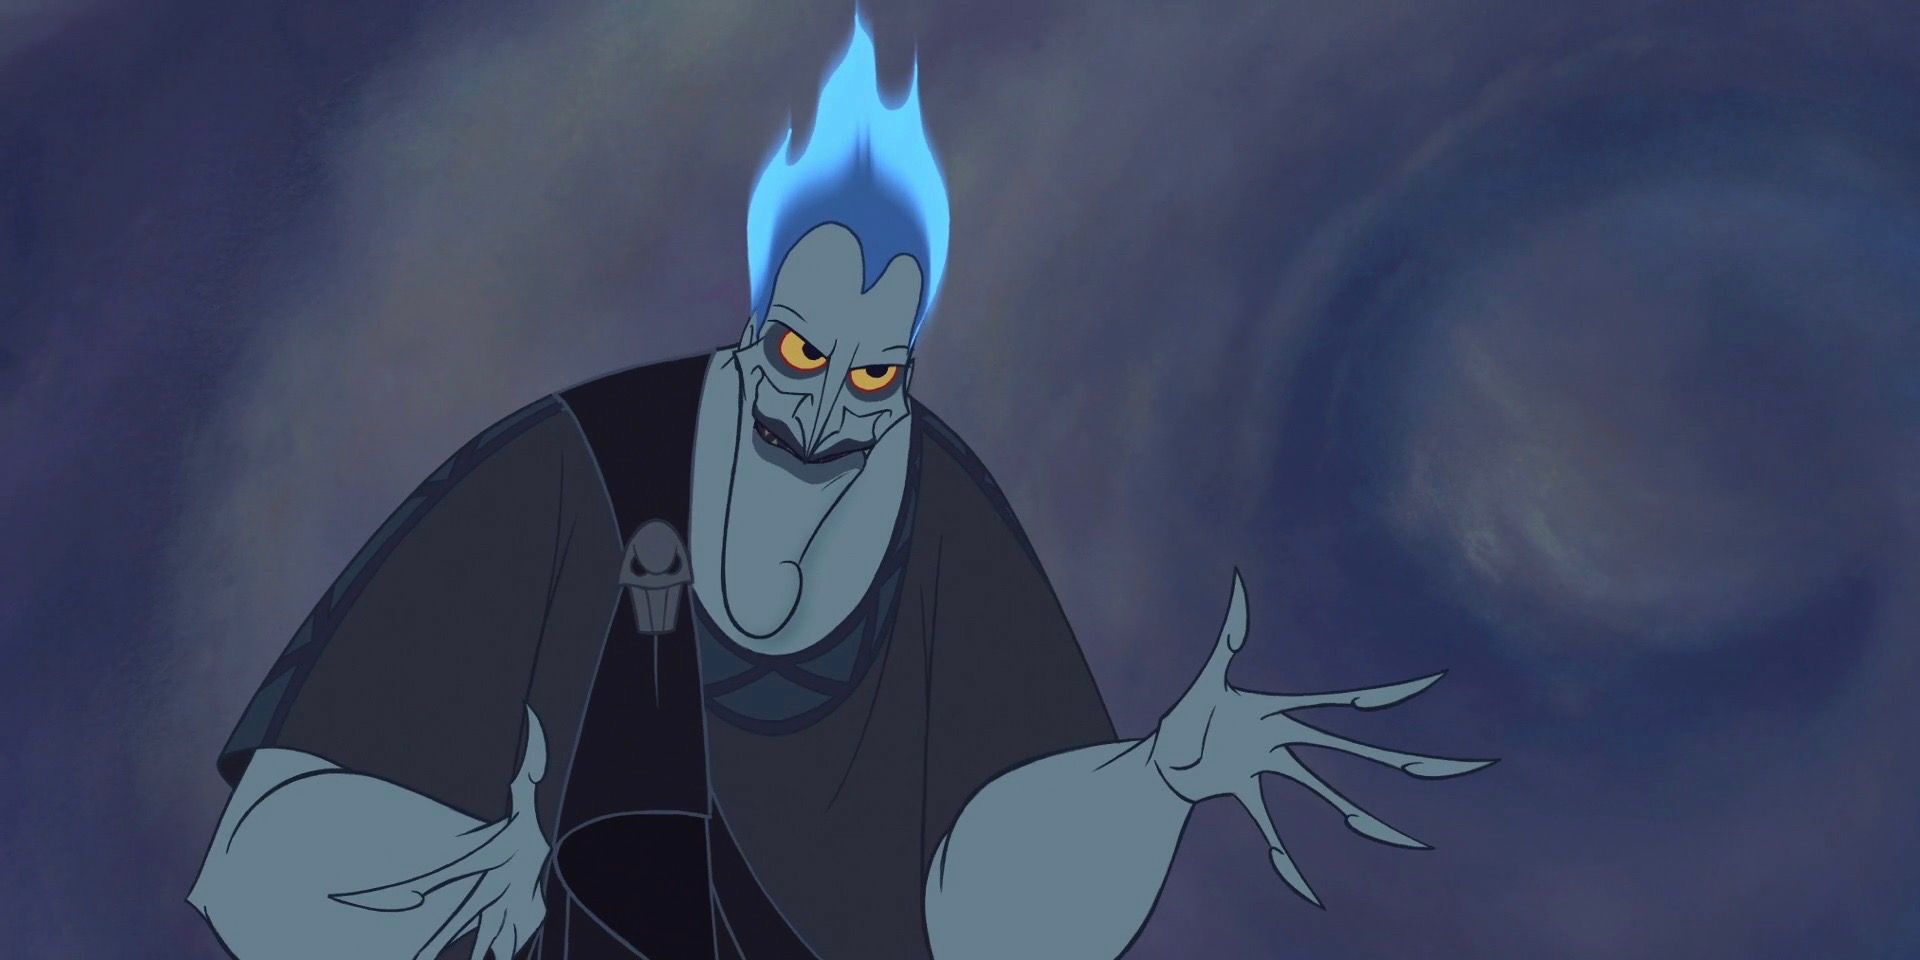 Hades spreads his arms out in Disney's Hercules